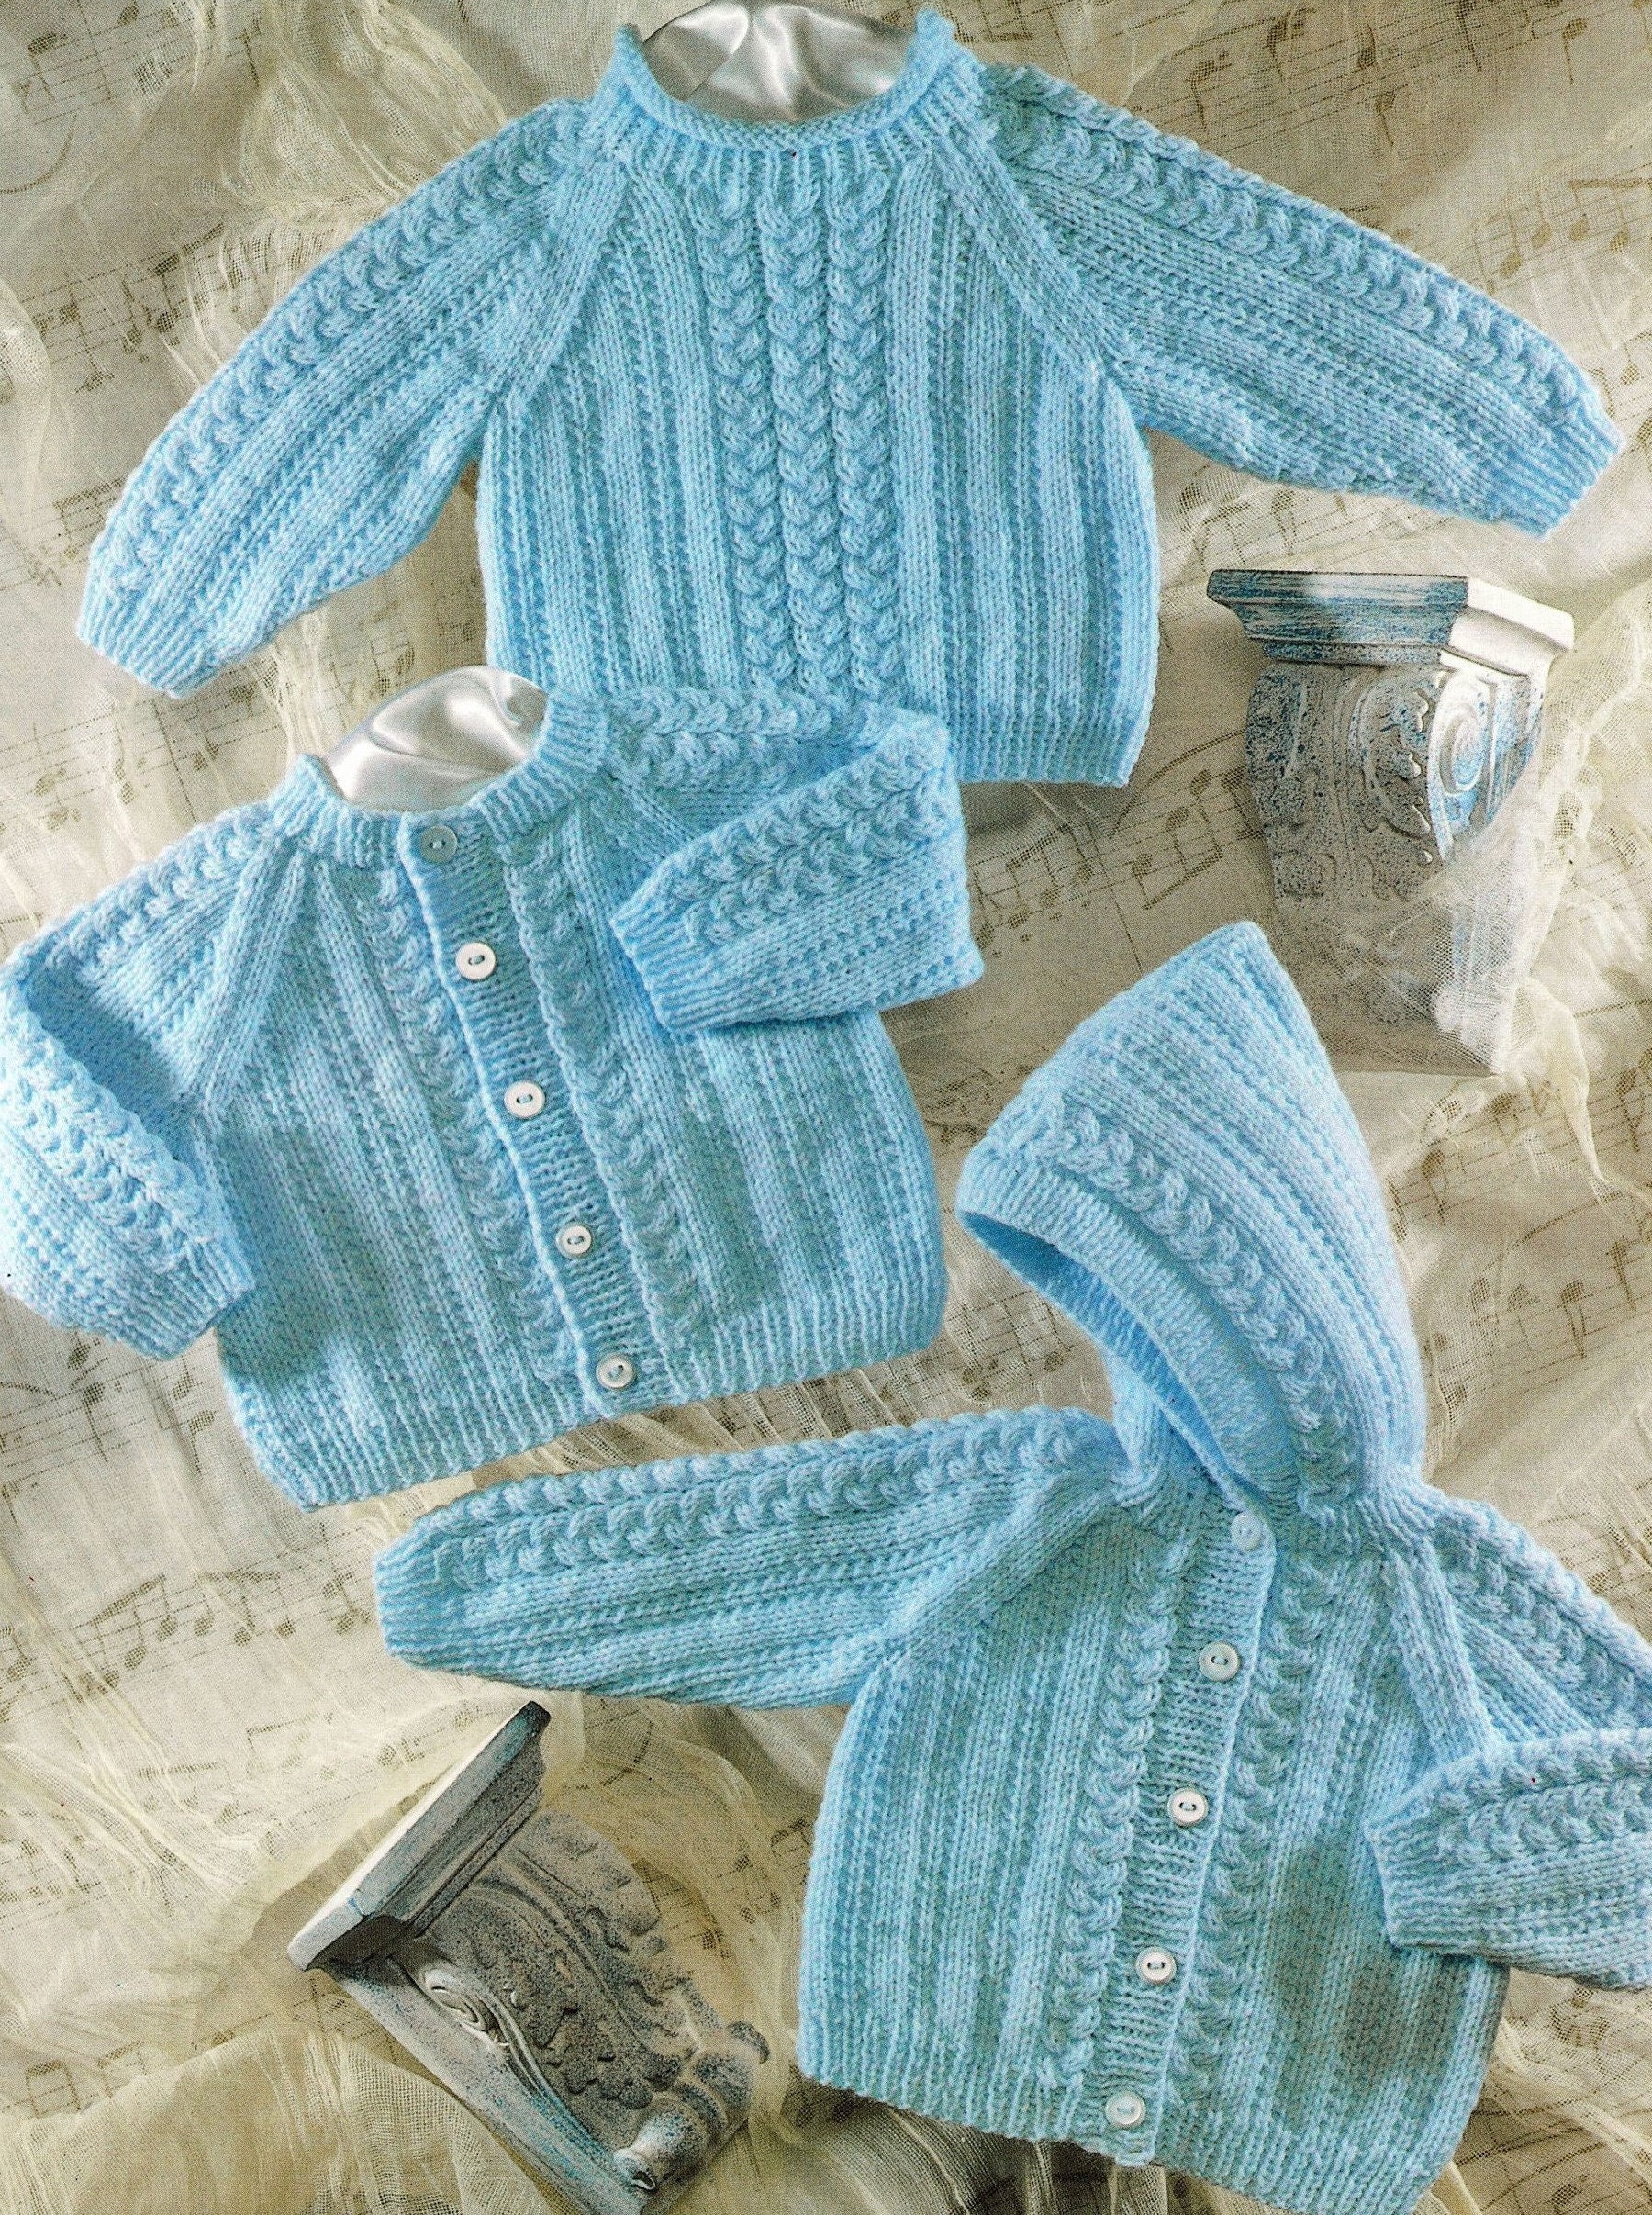 Babies, Toddlers and Childrens Cute Hooded Jacket, Cardigan and Sweater,  Vintage Knitting Pattern, PDF, Digital Download C954 -  Ireland